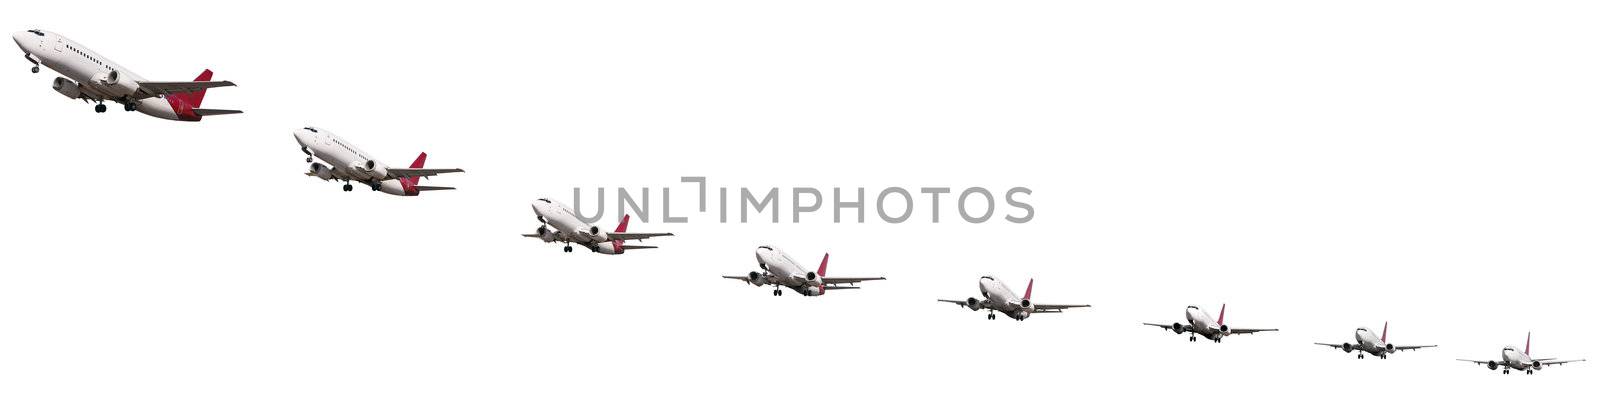 Sequence of airplane takeoff isolated on white background